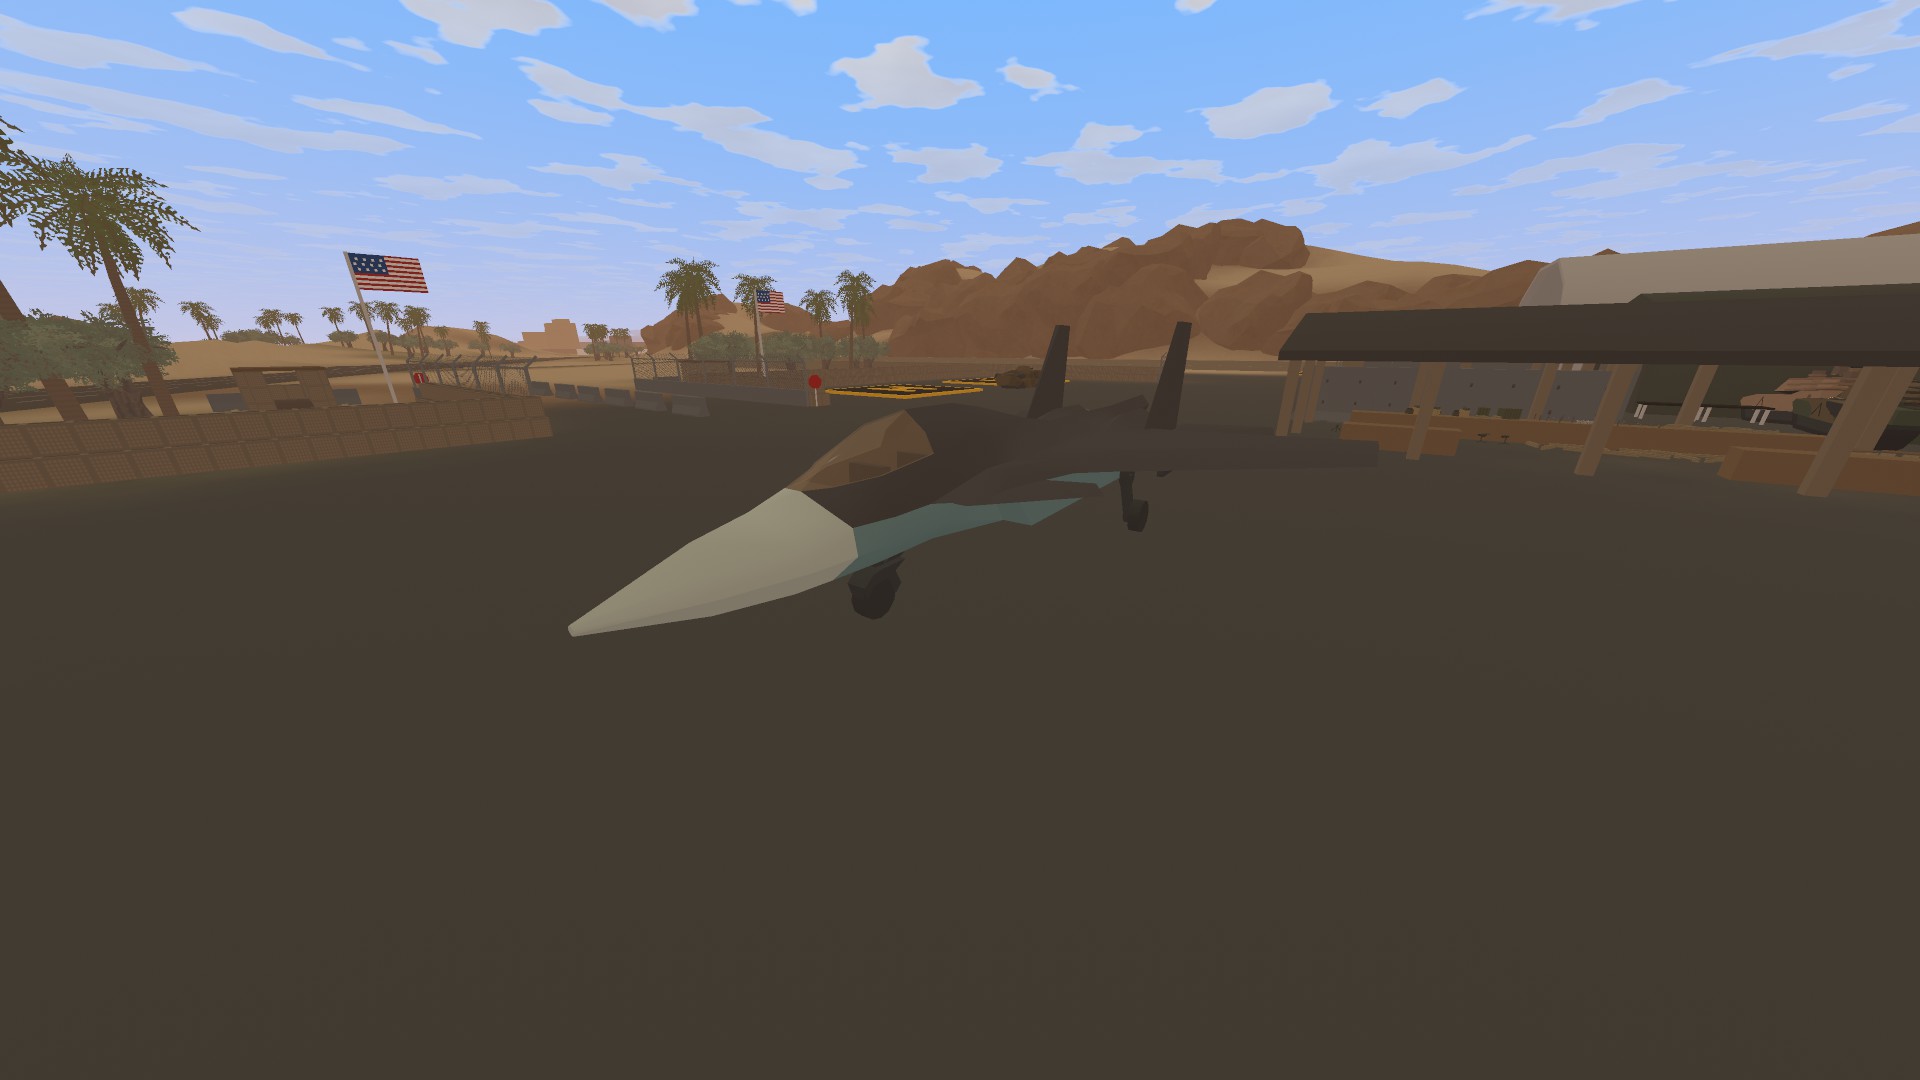 Unturned ID's for vehicles and ammo - MEC Vehicles: - 1A96956